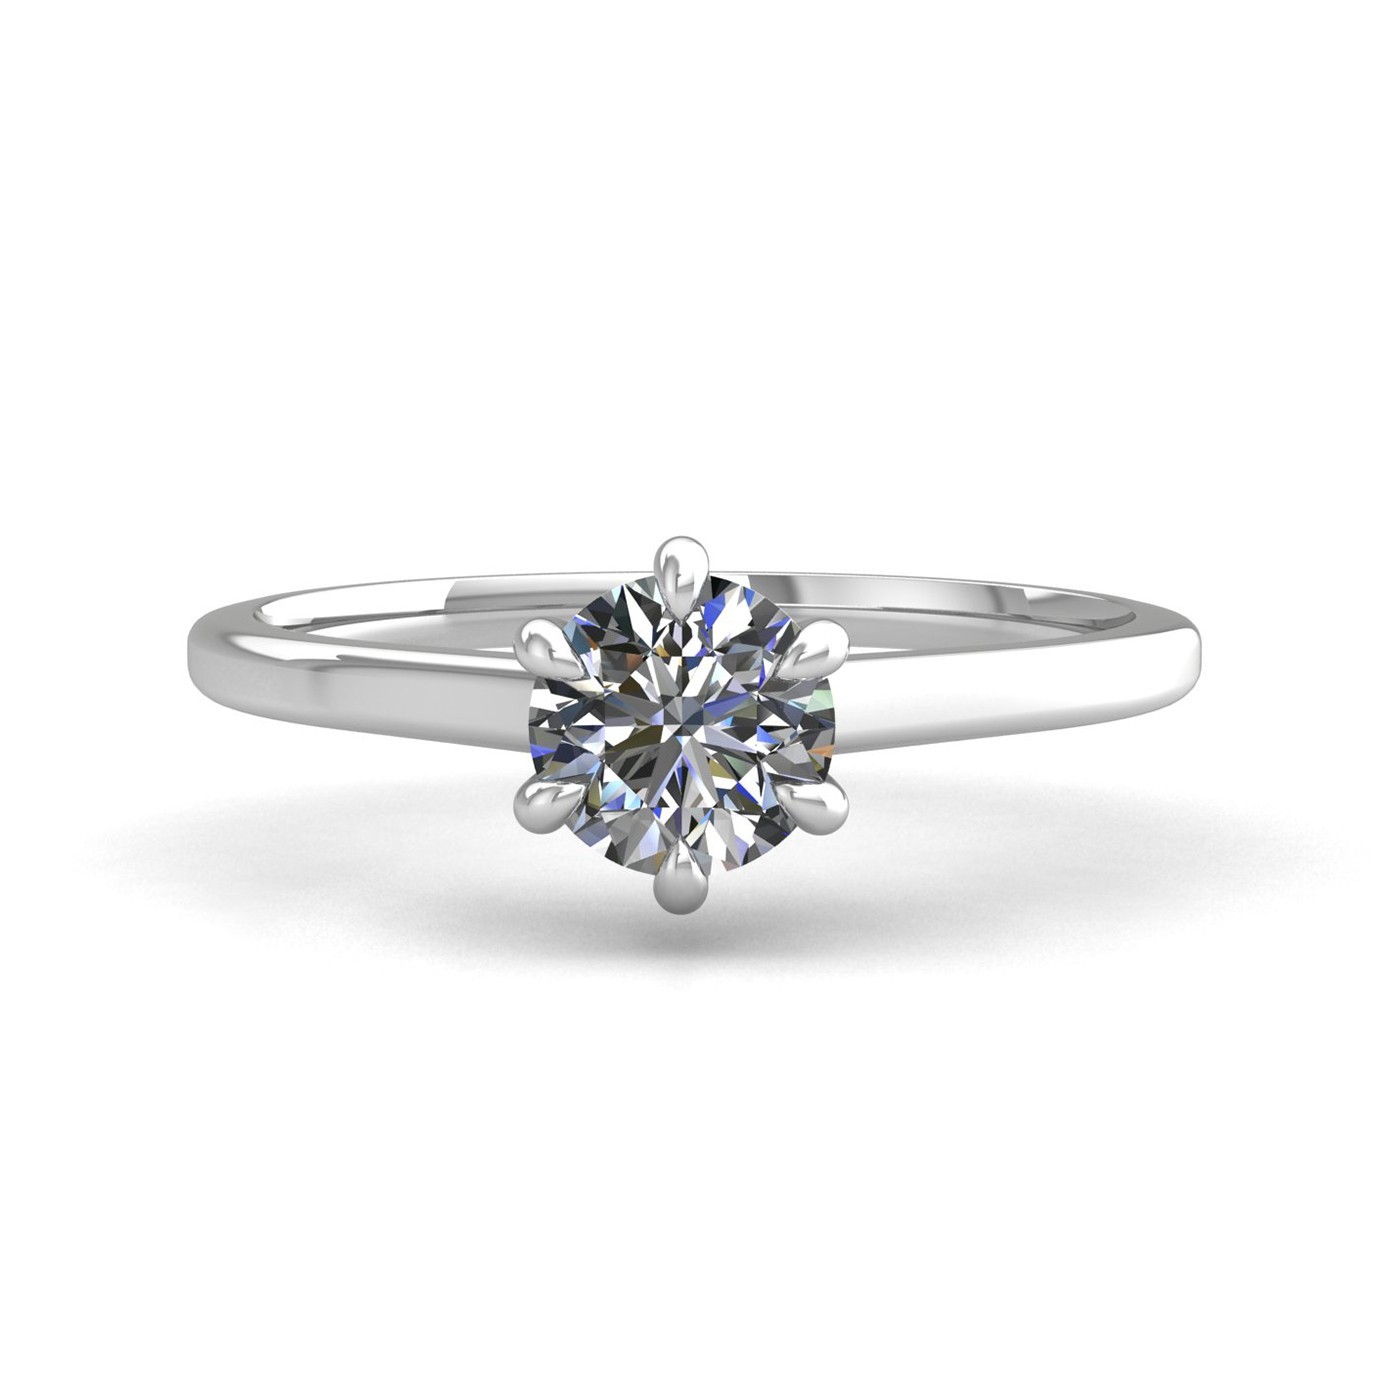 18k white gold 0,50 ct 6 prongs solitaire round cut diamond engagement ring with whisper thin band Photos & images